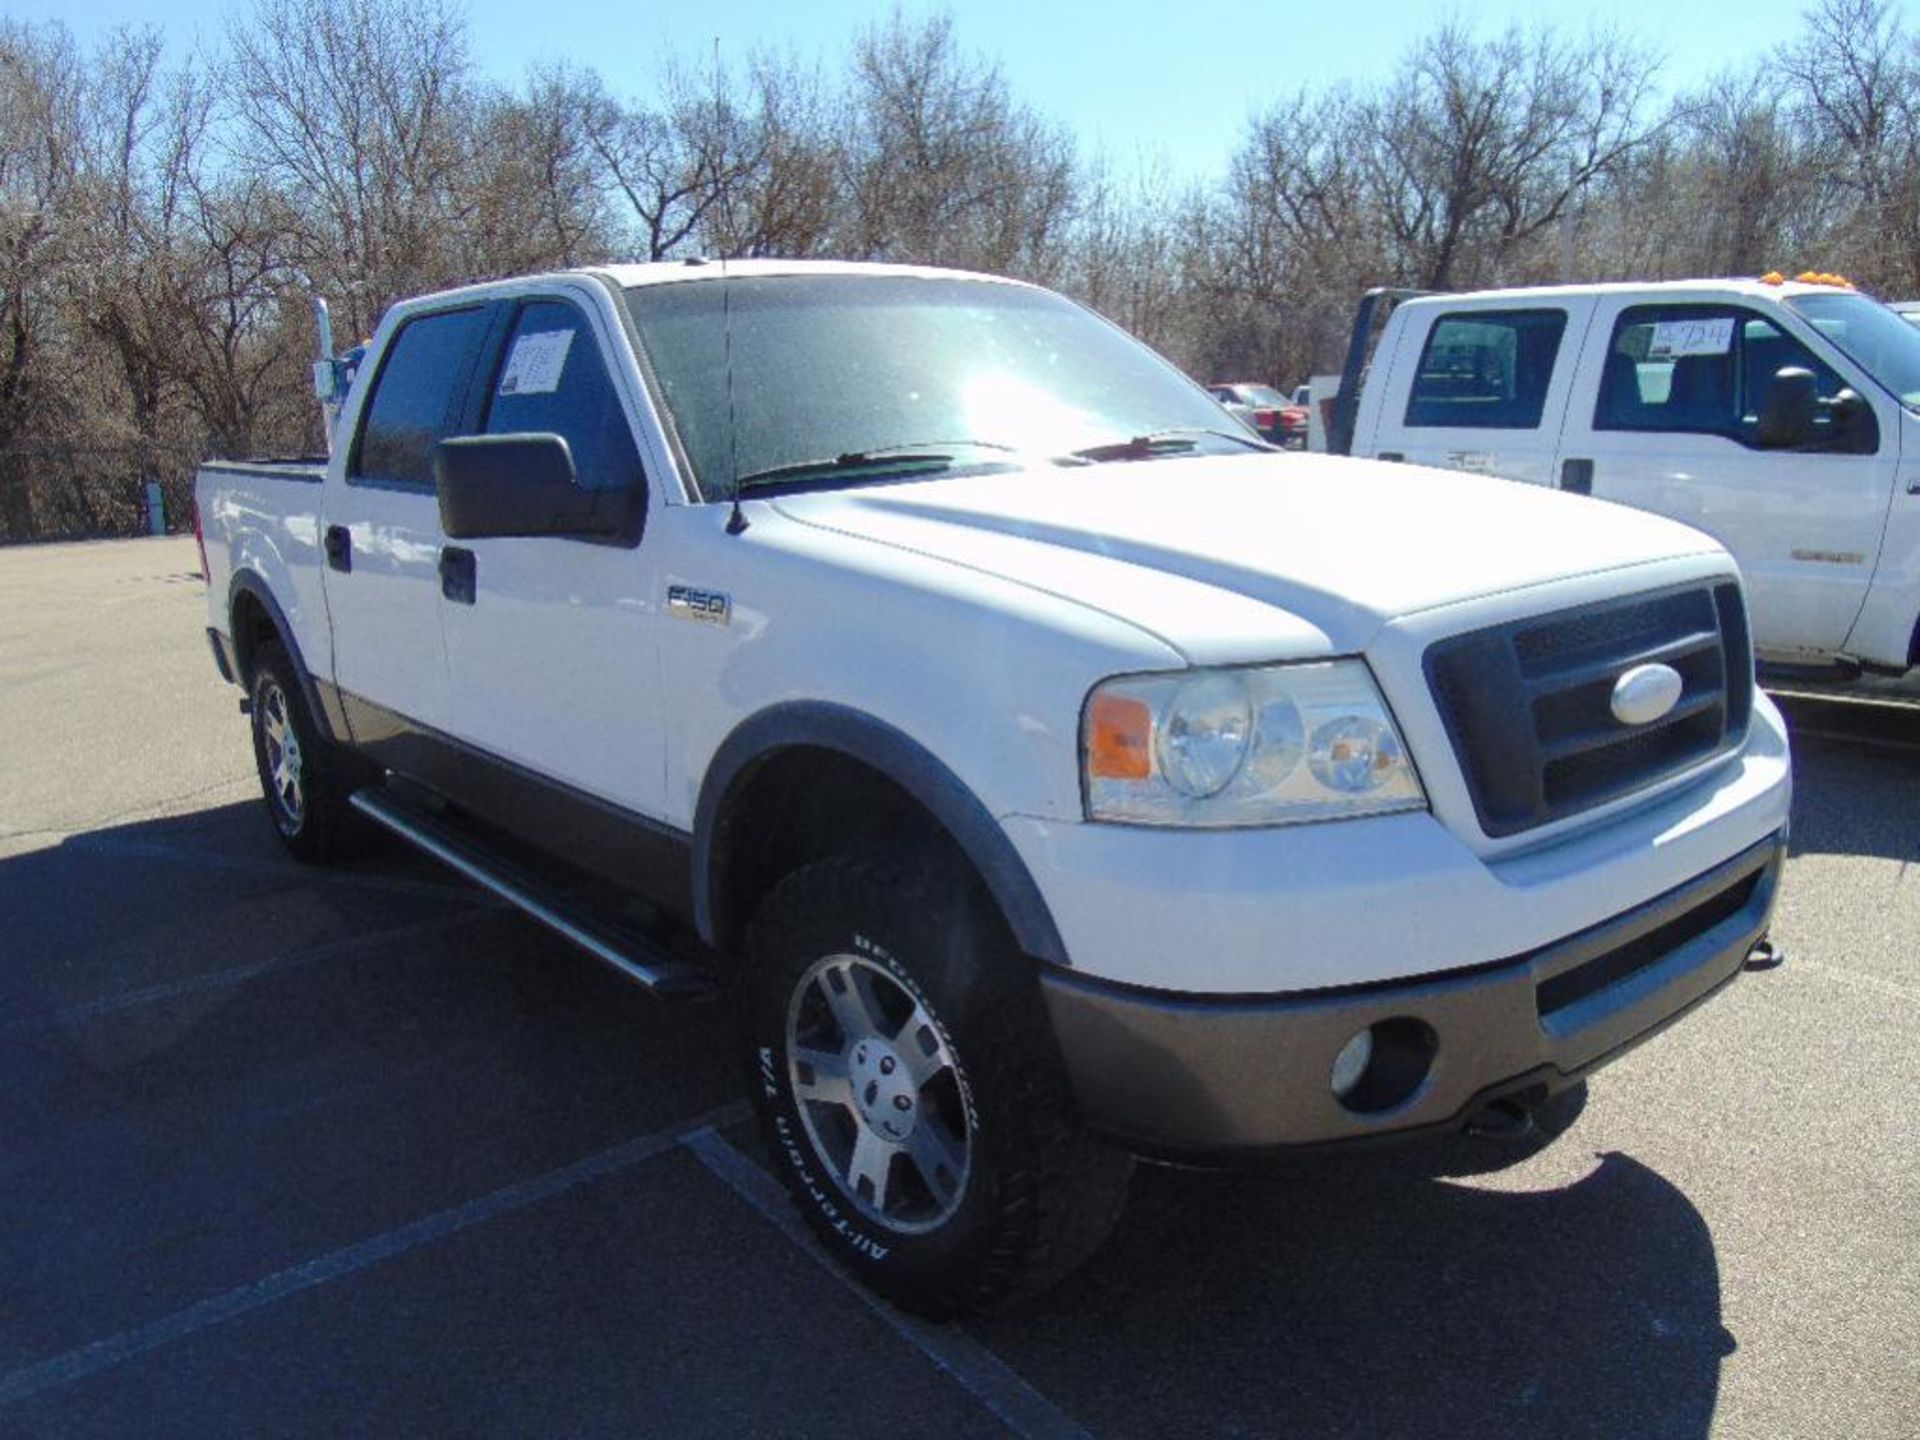 2007 Ford F150 4x4 Crewcab Pickup s/n 1ftpw14v97kd17198, v8 gas eng,auto trans, od reads 315729 - Image 2 of 7